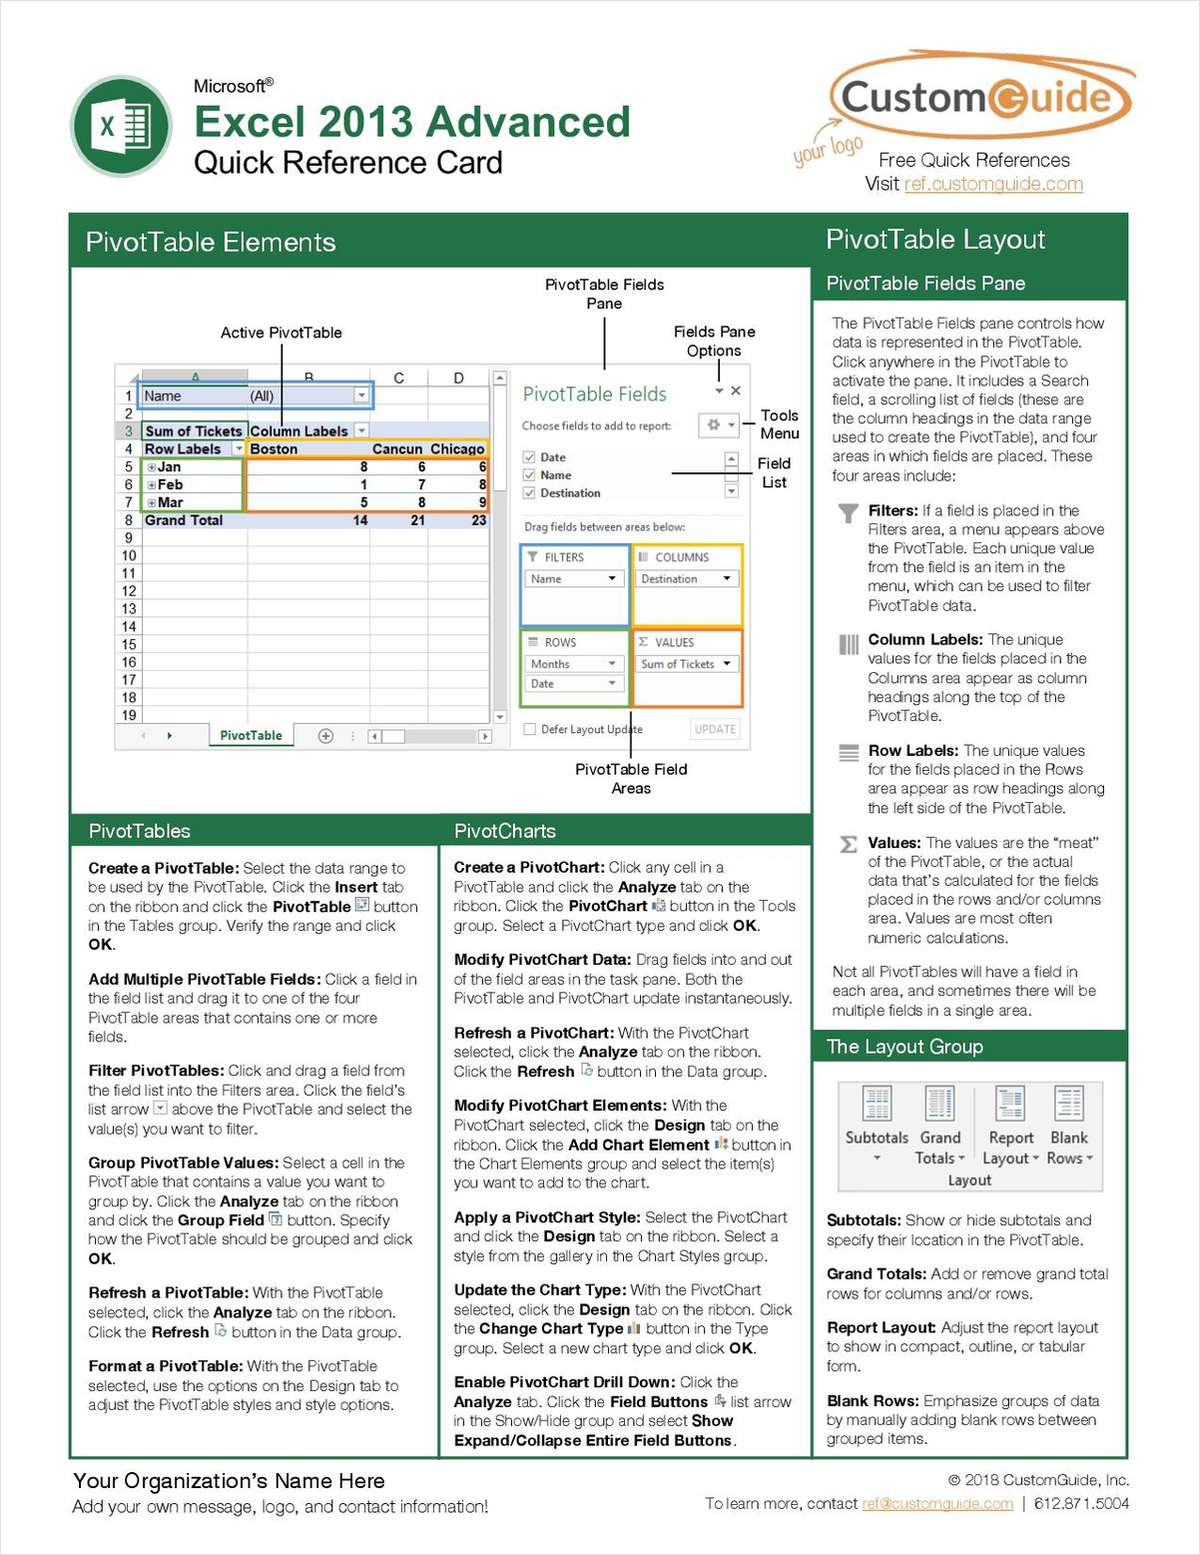 Microsoft Excel 2013 Advanced - Quick Reference Guide